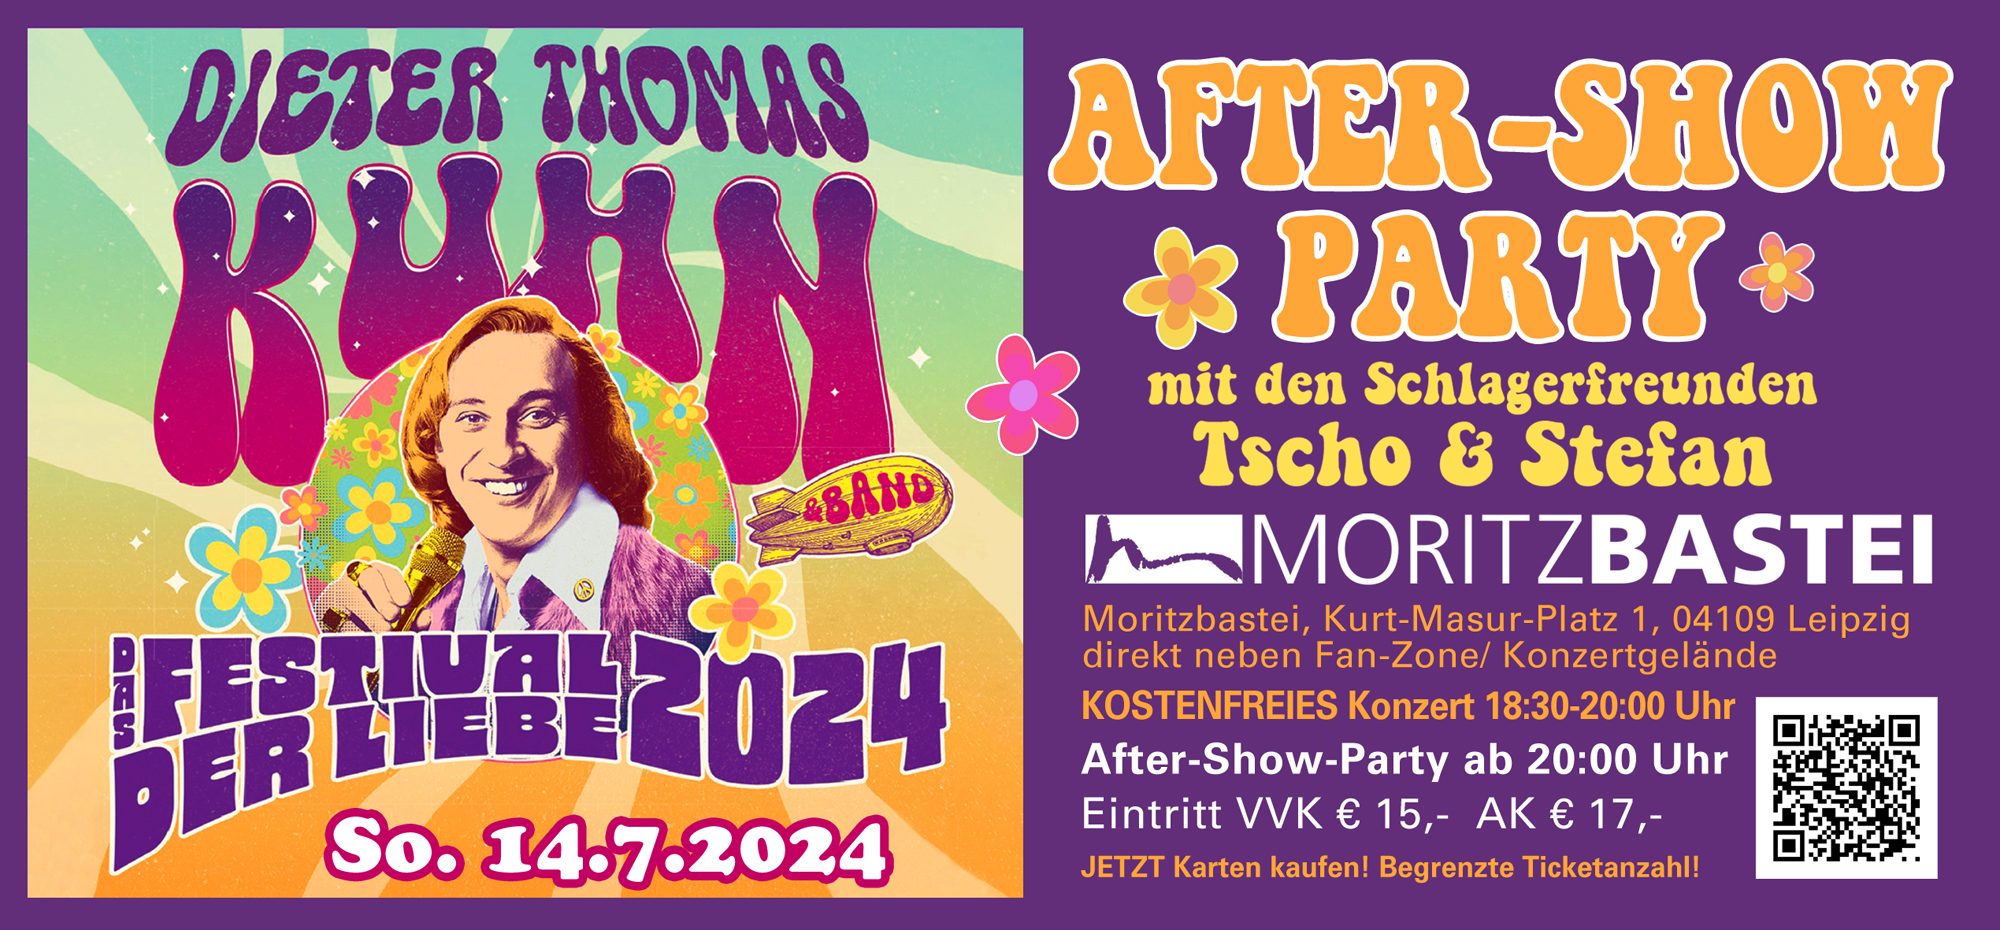 Dieter Thomas Kuhn & Band – Aftershowparty